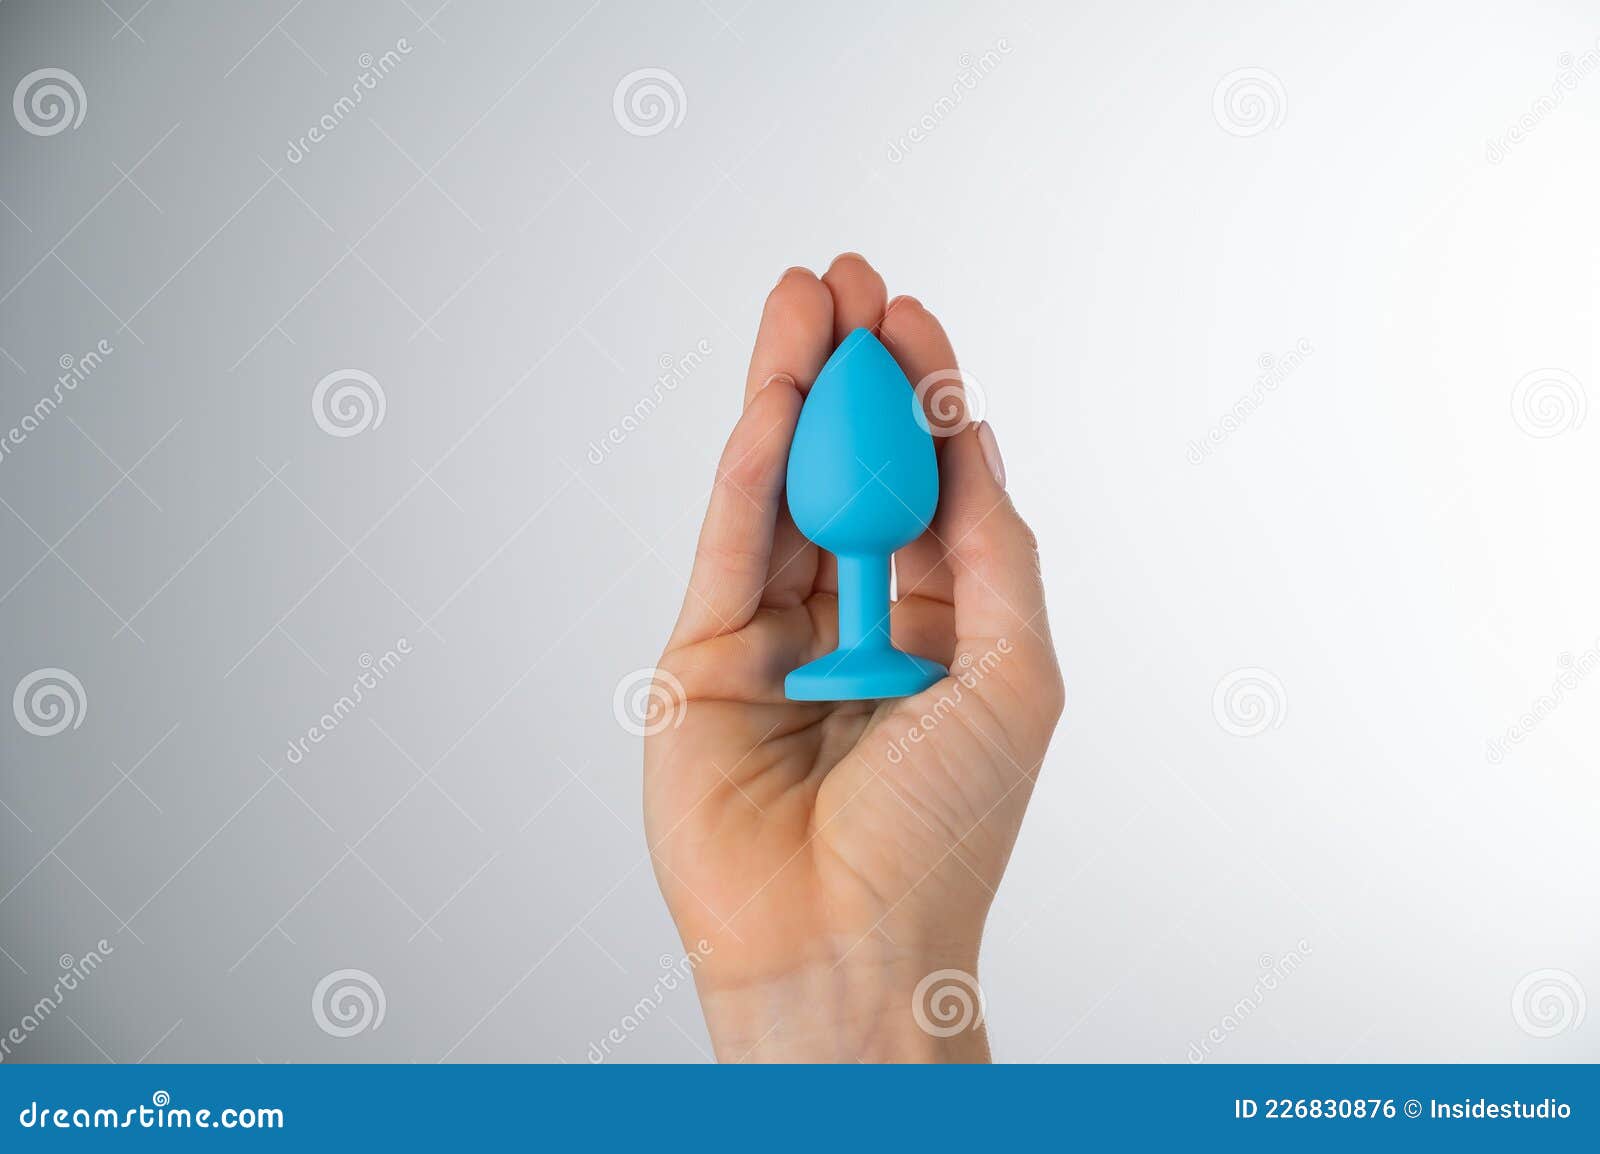 Woman Holding a Blue Plug on a White Background